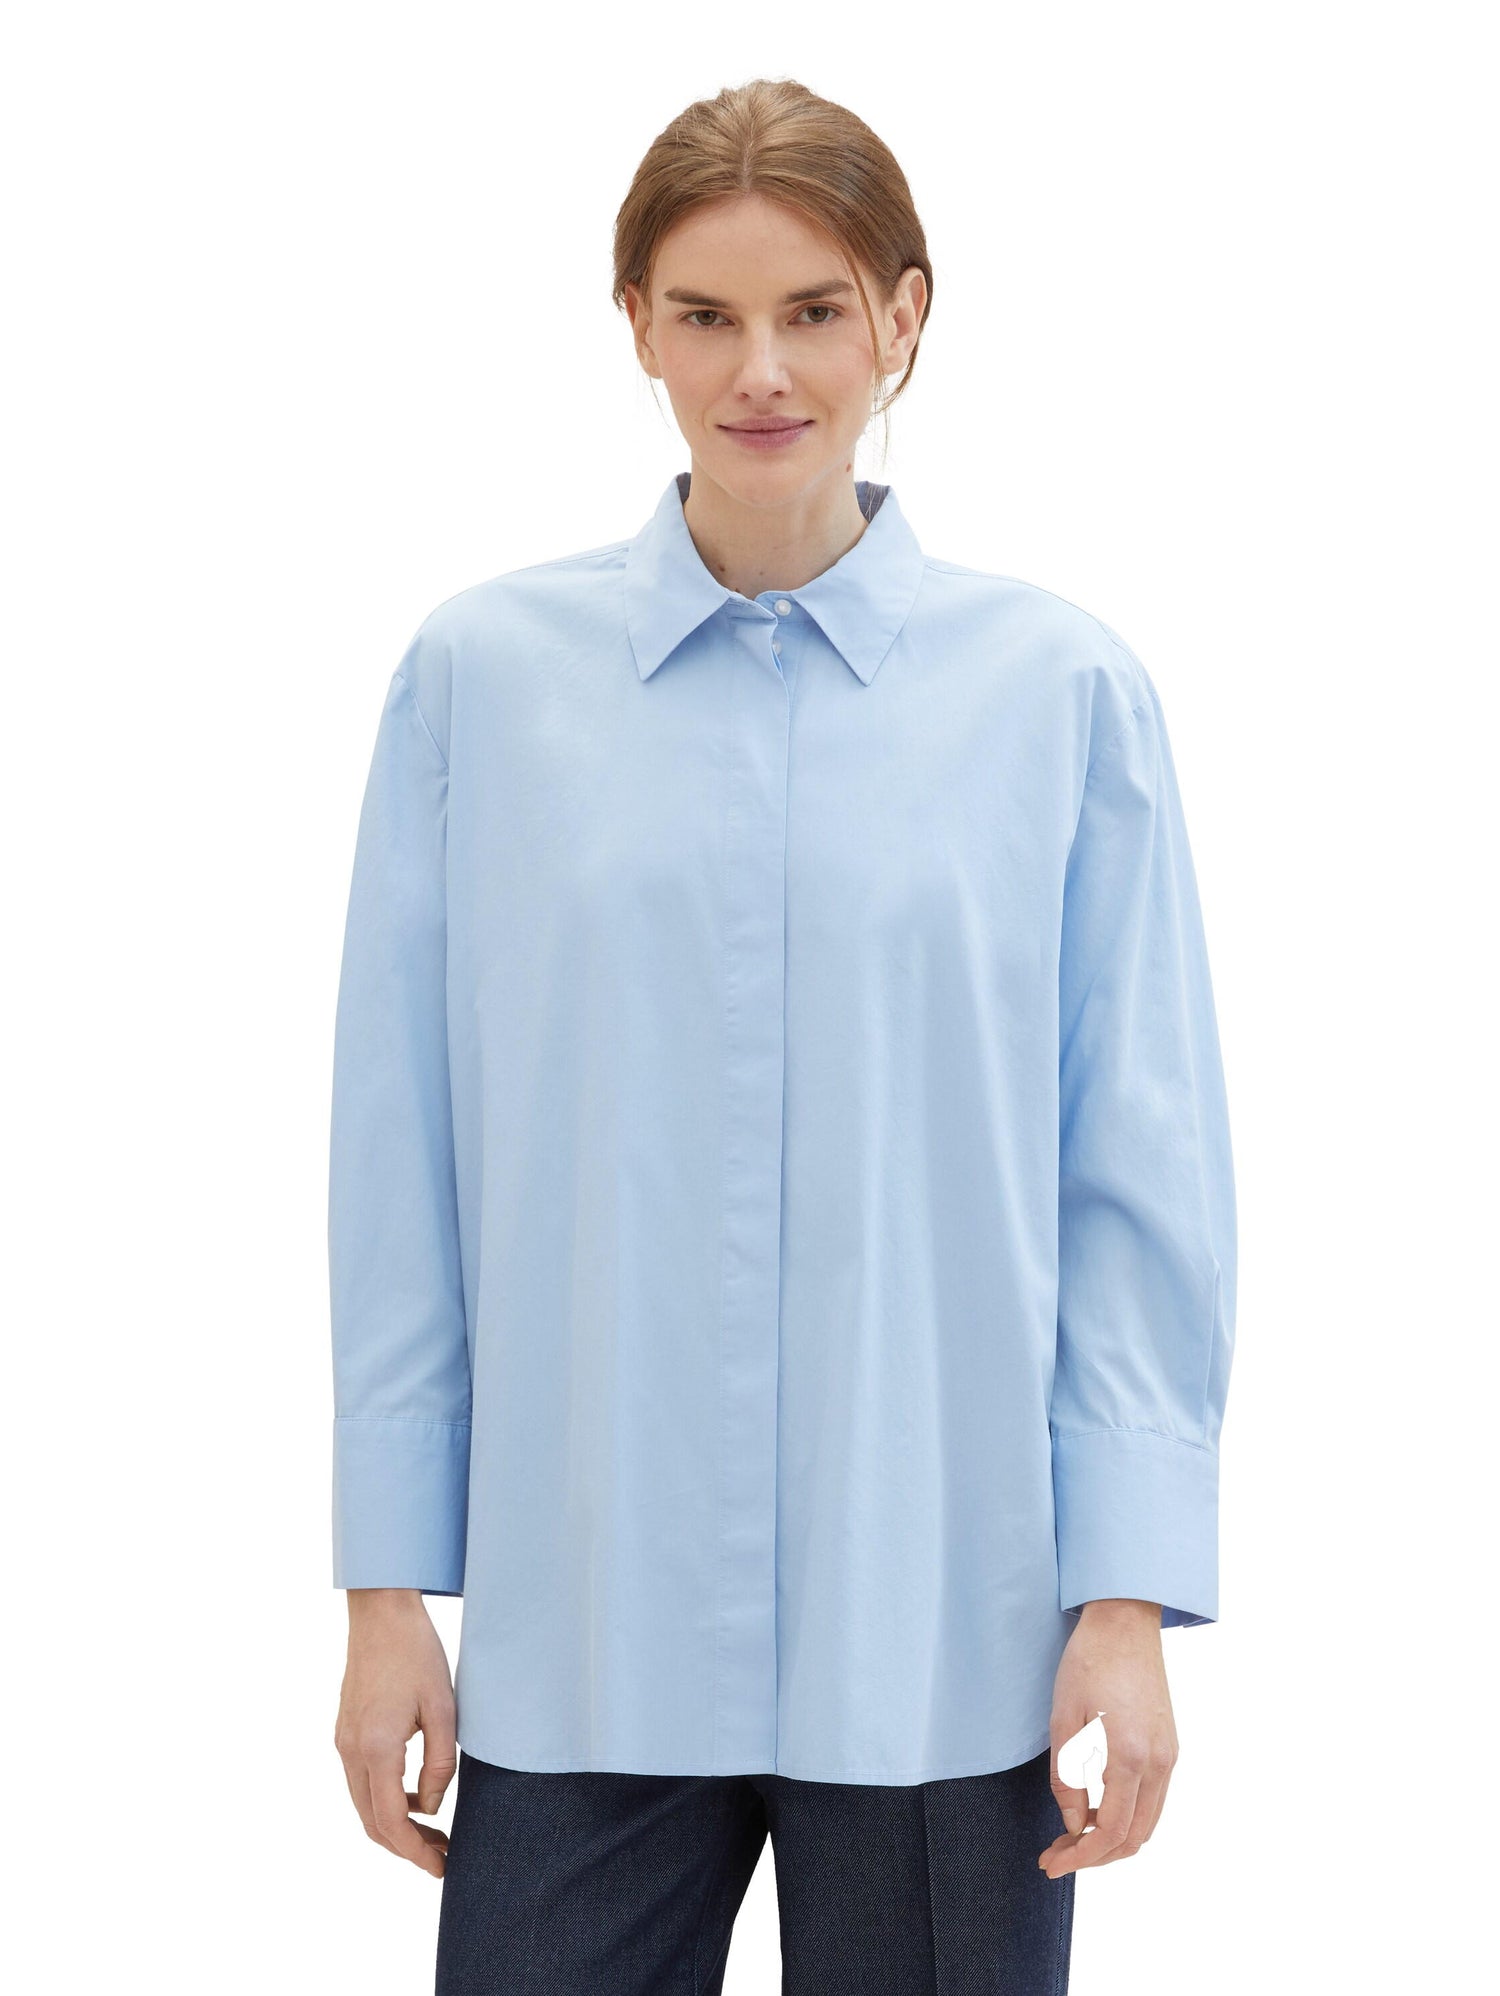 Solid Blouse Shirt_1040315_34587_06